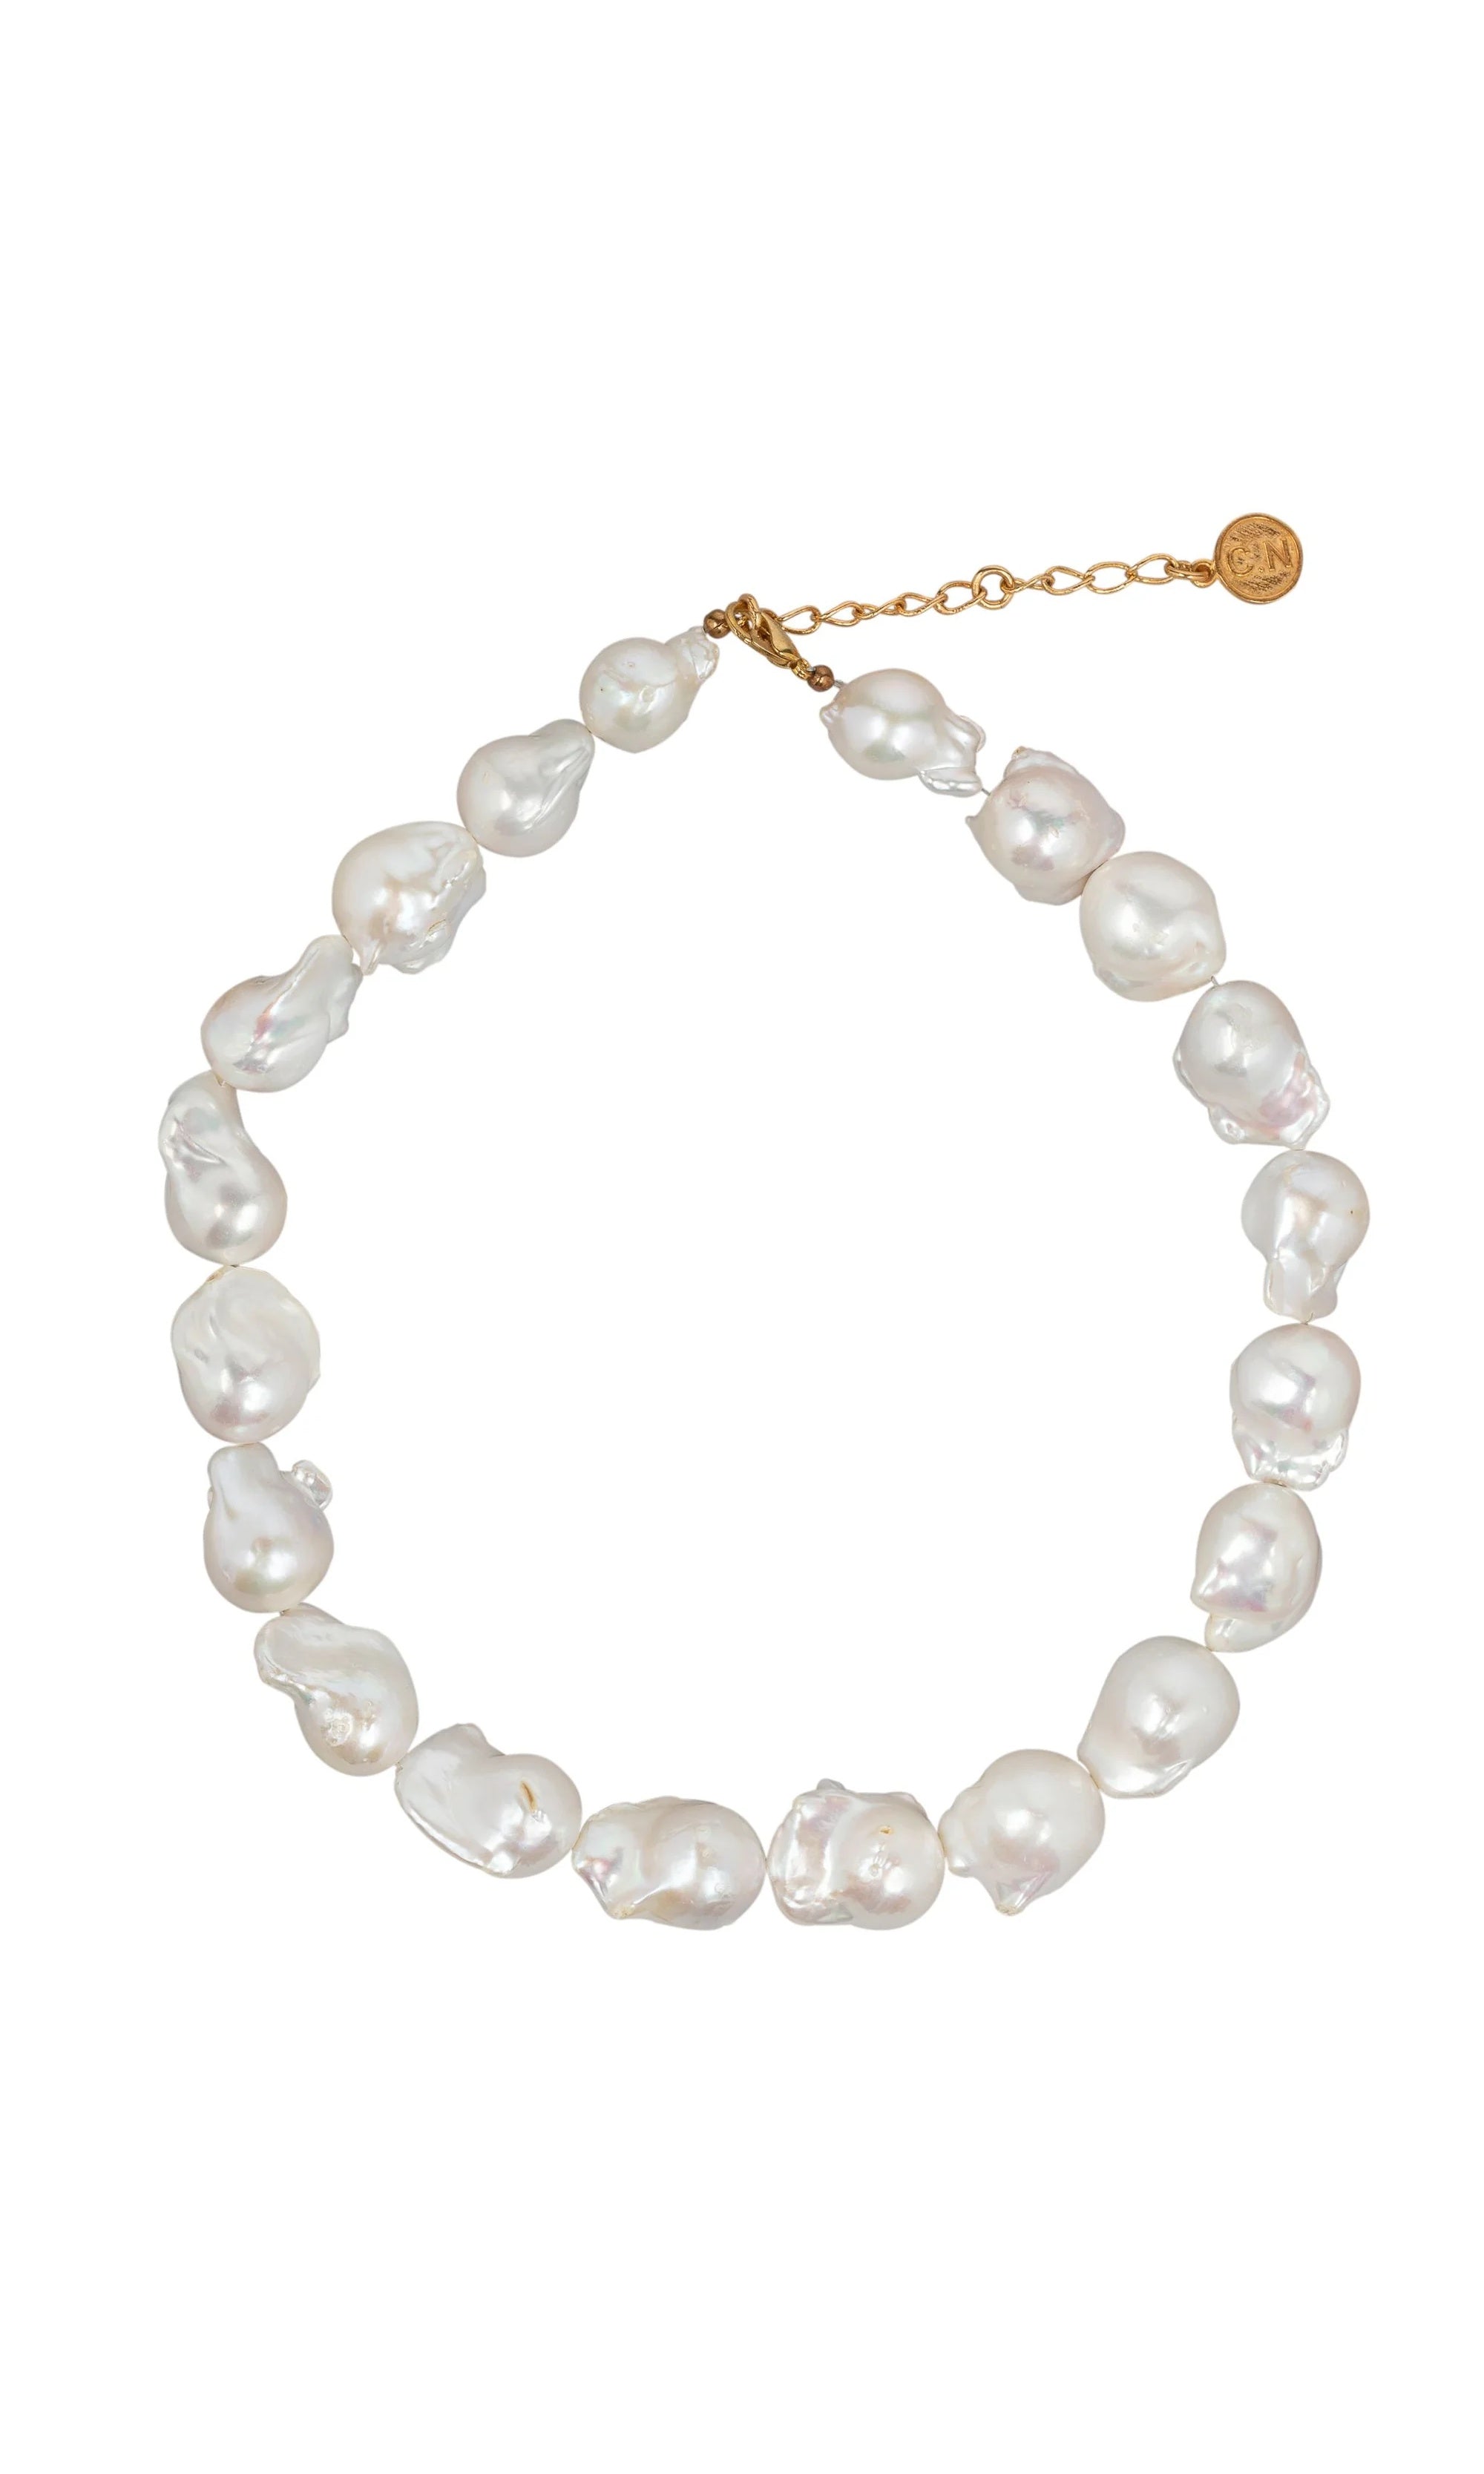 Christie Nicolaides Isabetta Pearl Necklace - Back soon!